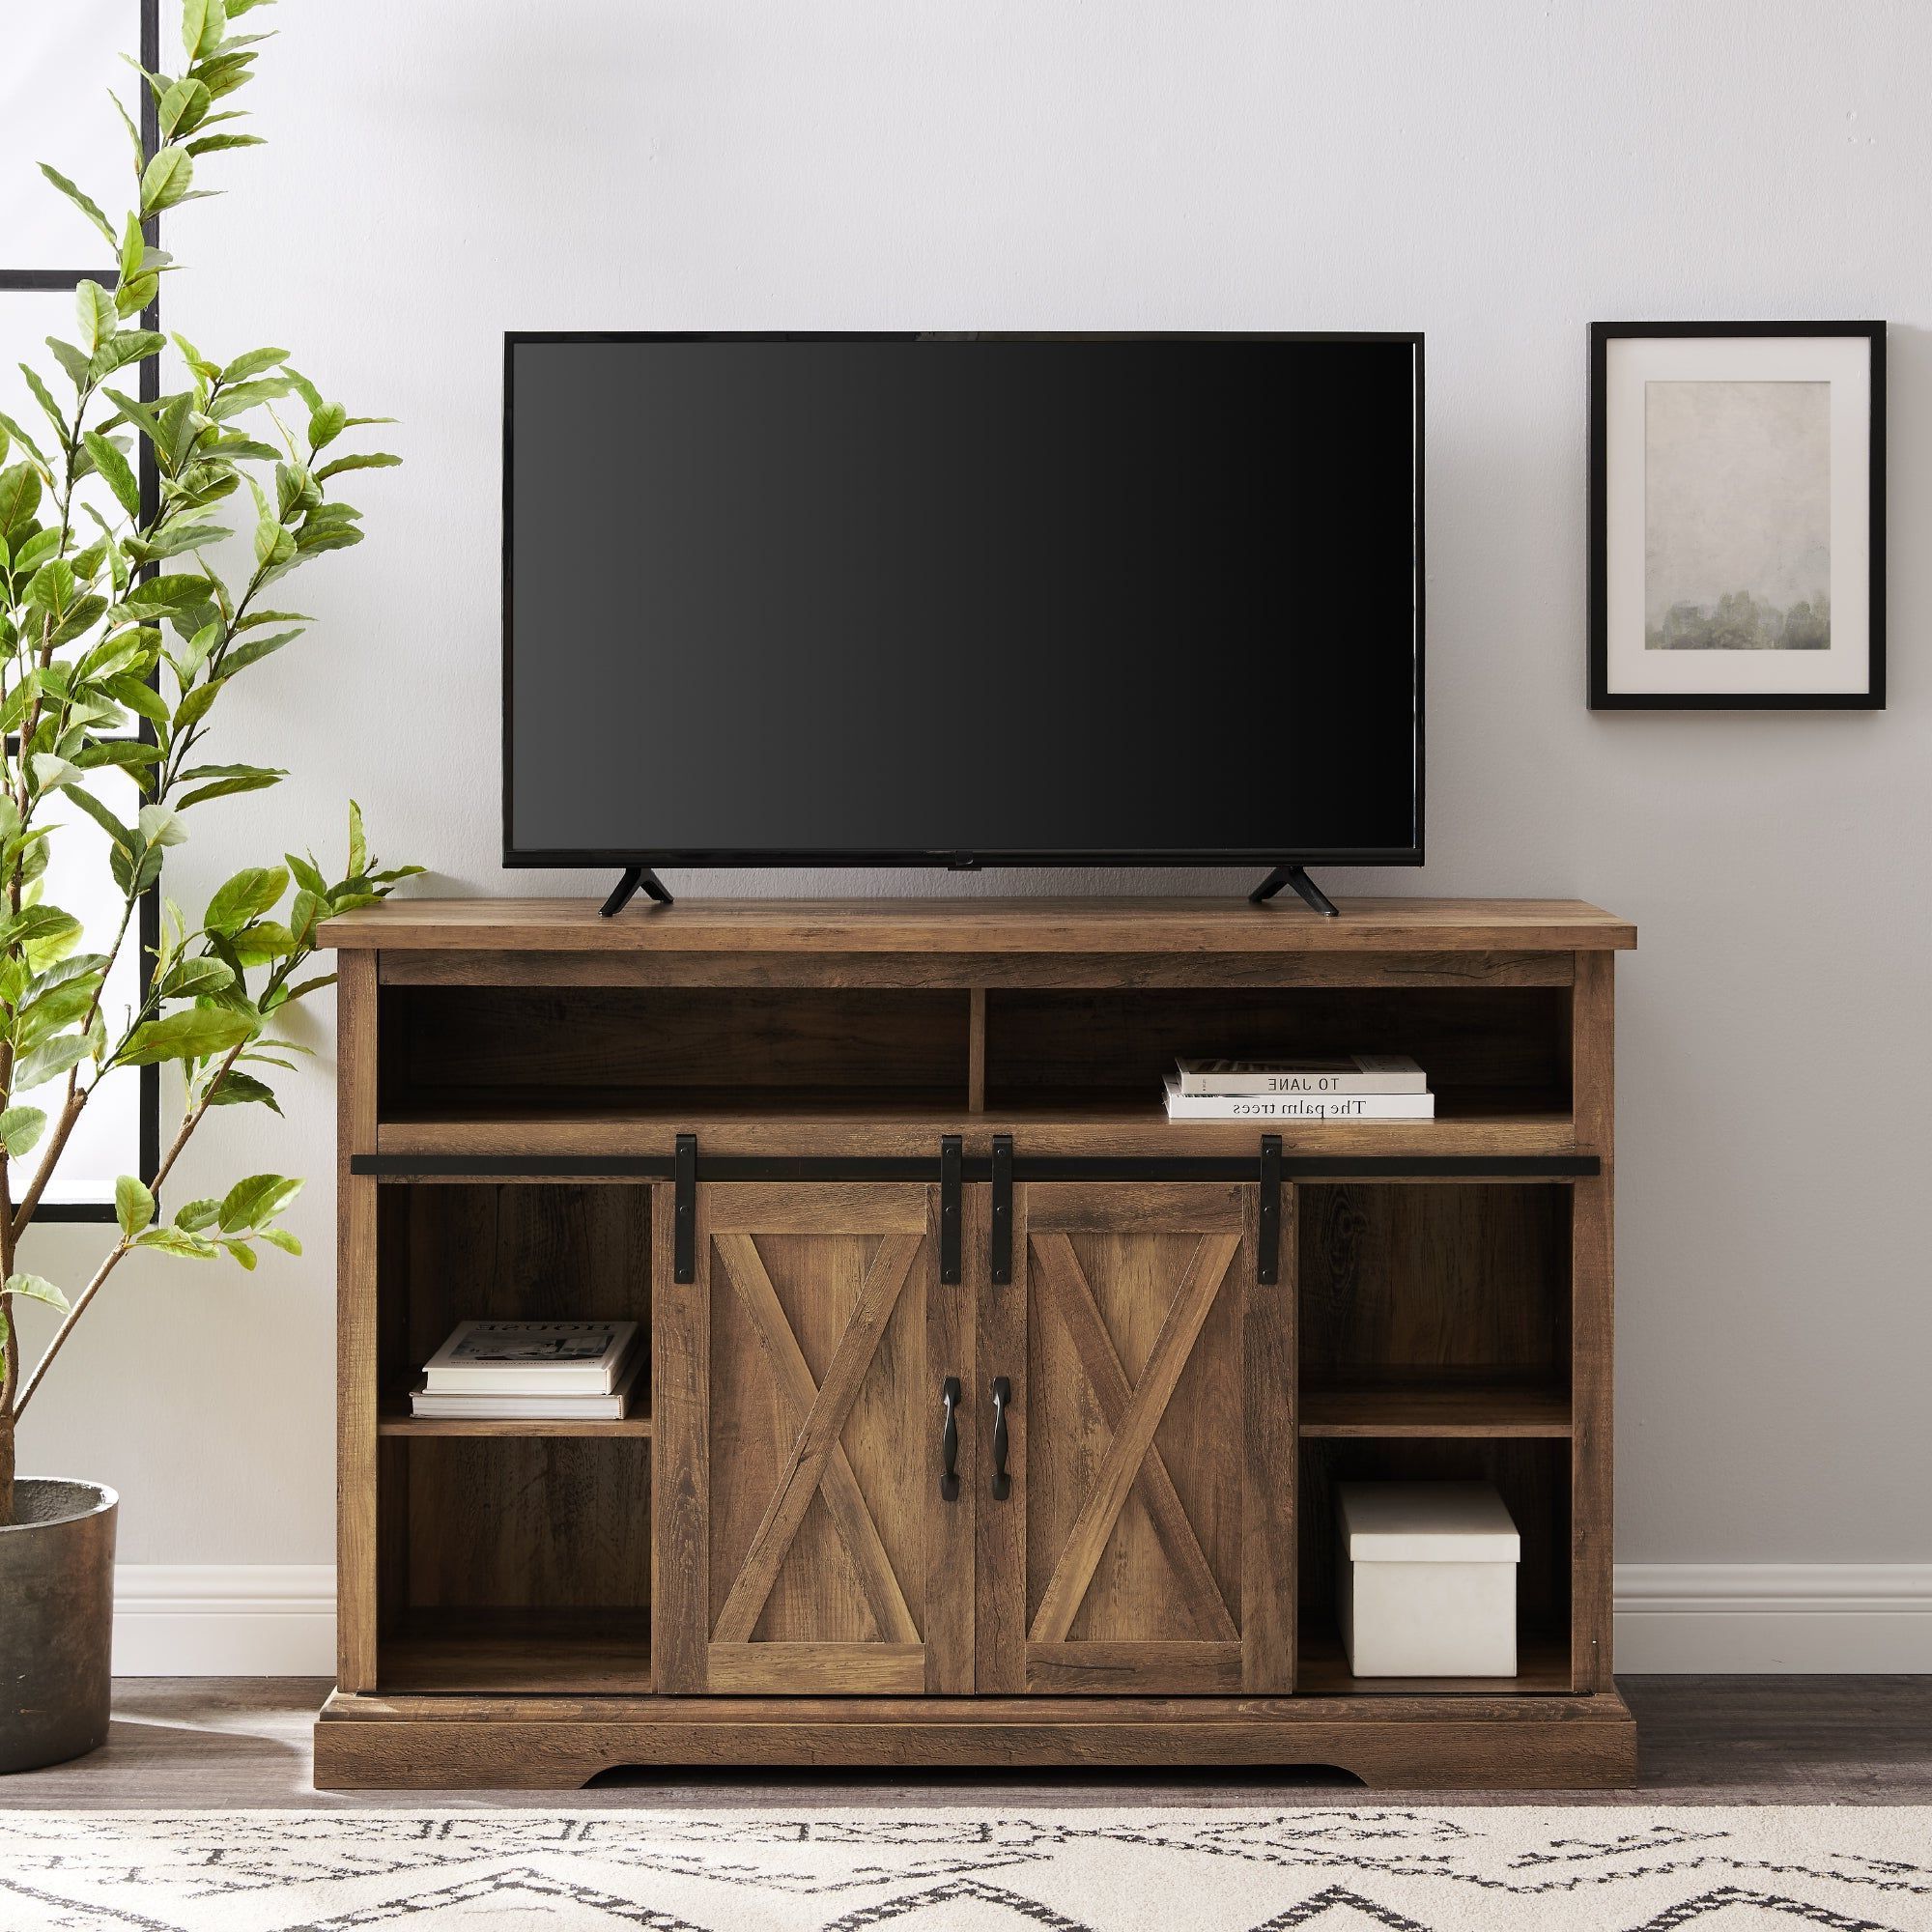 Modern Farmhouse Rustic Tv Stands Intended For Well Liked 52" Sliding Barn Door Highboy Modern Farmhouse Tv Stand Living Room (View 14 of 15)